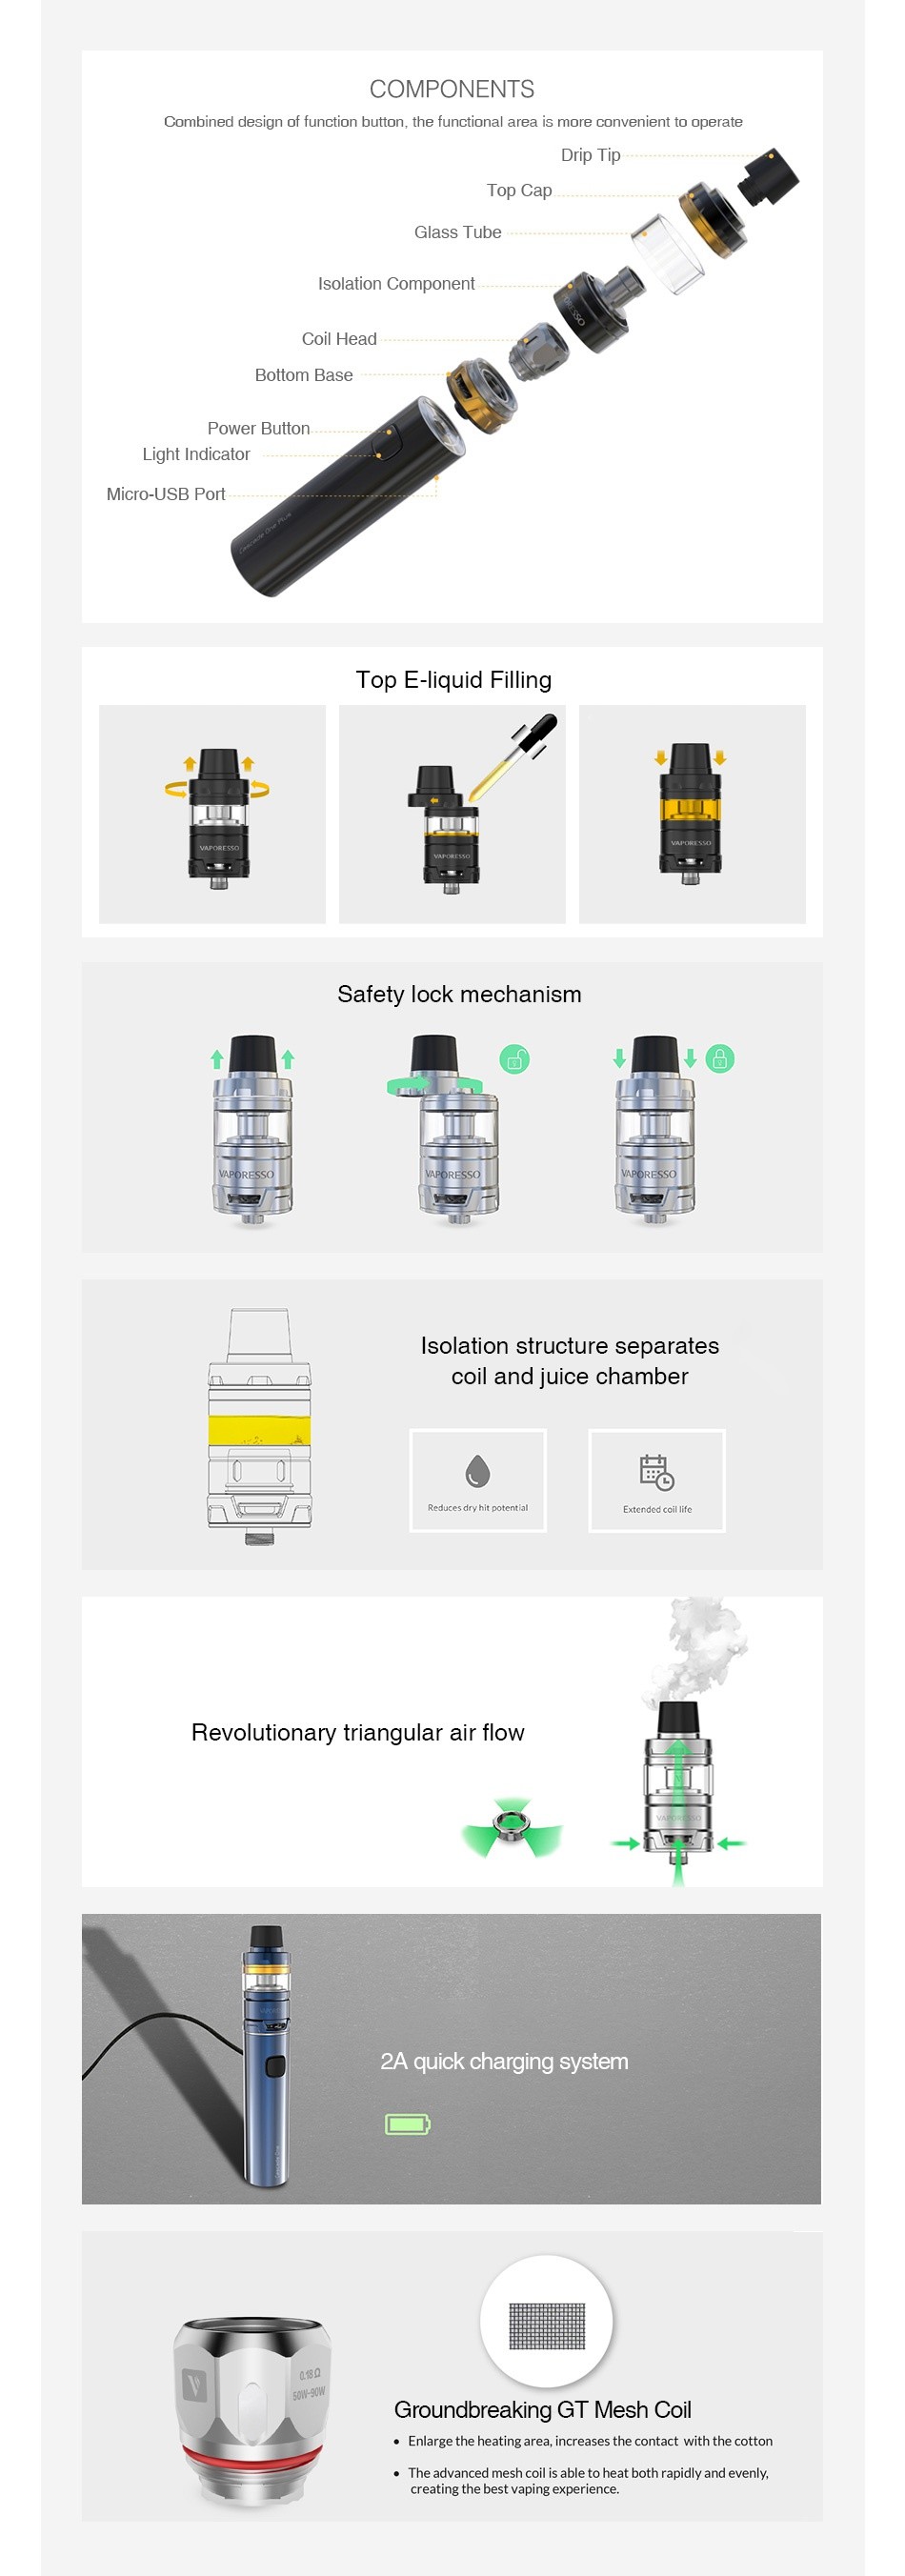 Vaporesso Cascade One Plus Starter Kit 3000mAh COMPONENTS Combined design of function button  the functional area is more convenient to operate np I ip Glass tube olation Component Power button MicIO USB Porl Top E liquid Filling Safety lock mech Isolation structure separates Revolutionary triangular air flow 2A quick charging syste Groundbreaking GT Mesh Coil The advanced mesh cail is able to hsat both rapid y and evenly  creating the best vaplng cofer cnce